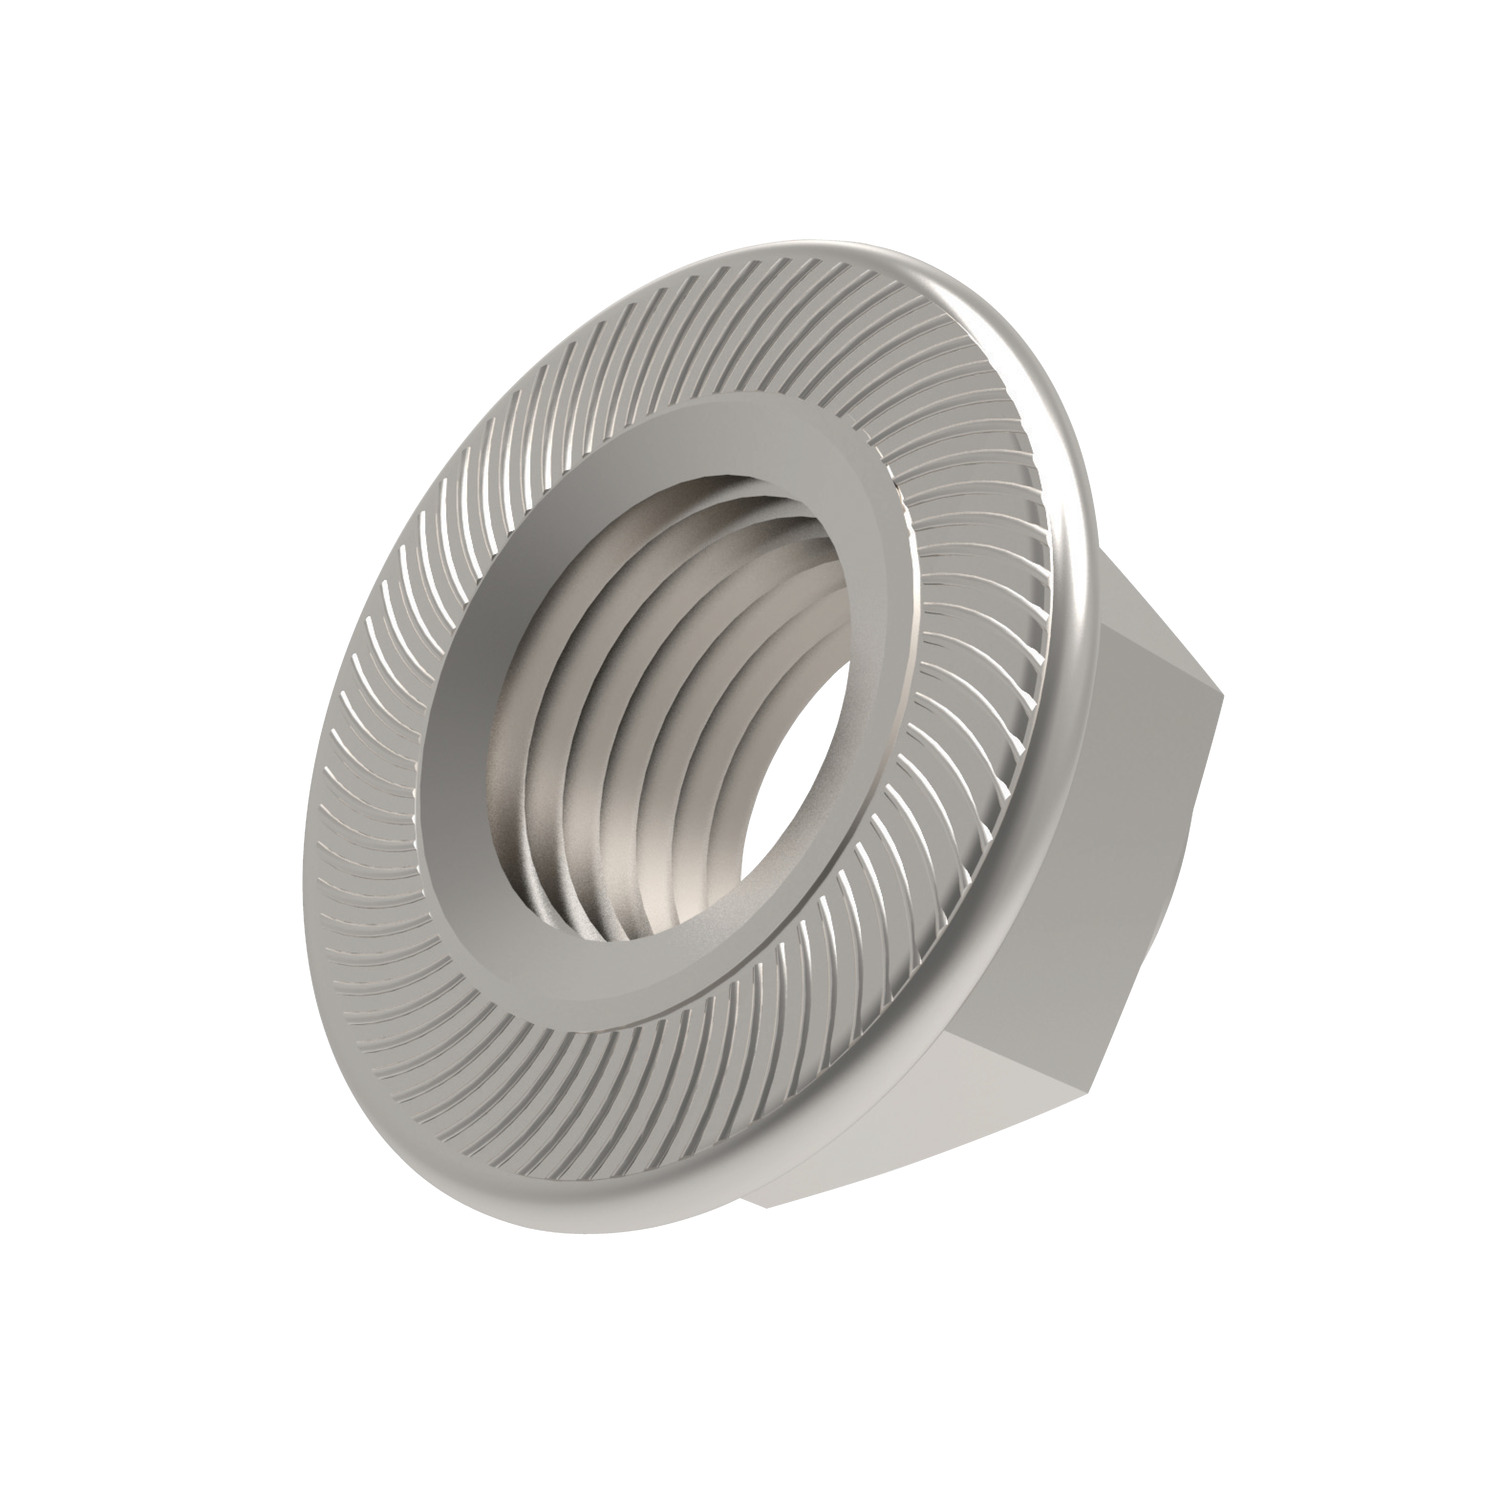 P0309.ZP - Serrated Flanged Nuts